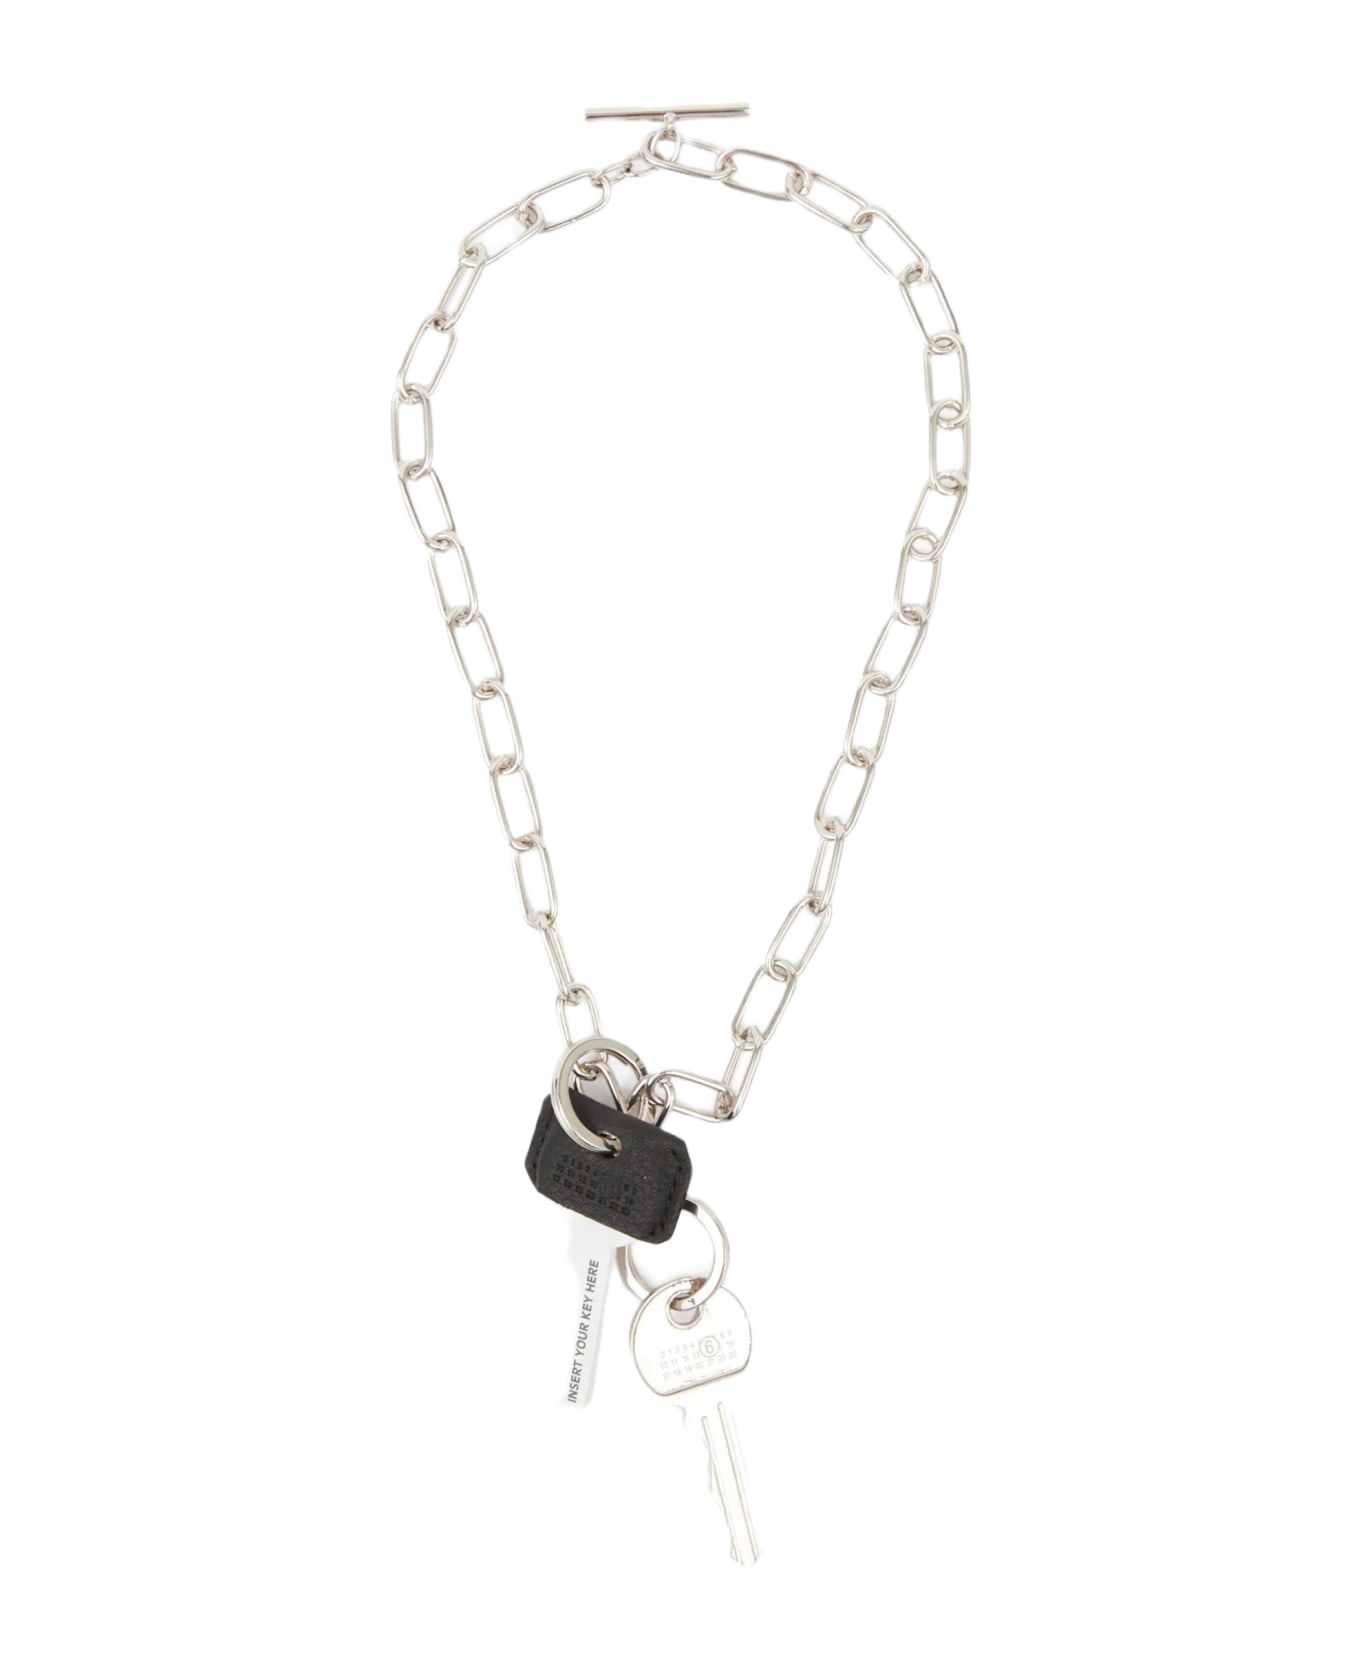 MM6 Maison Margiela Collana Silver metal chain necklace with keys - Argento